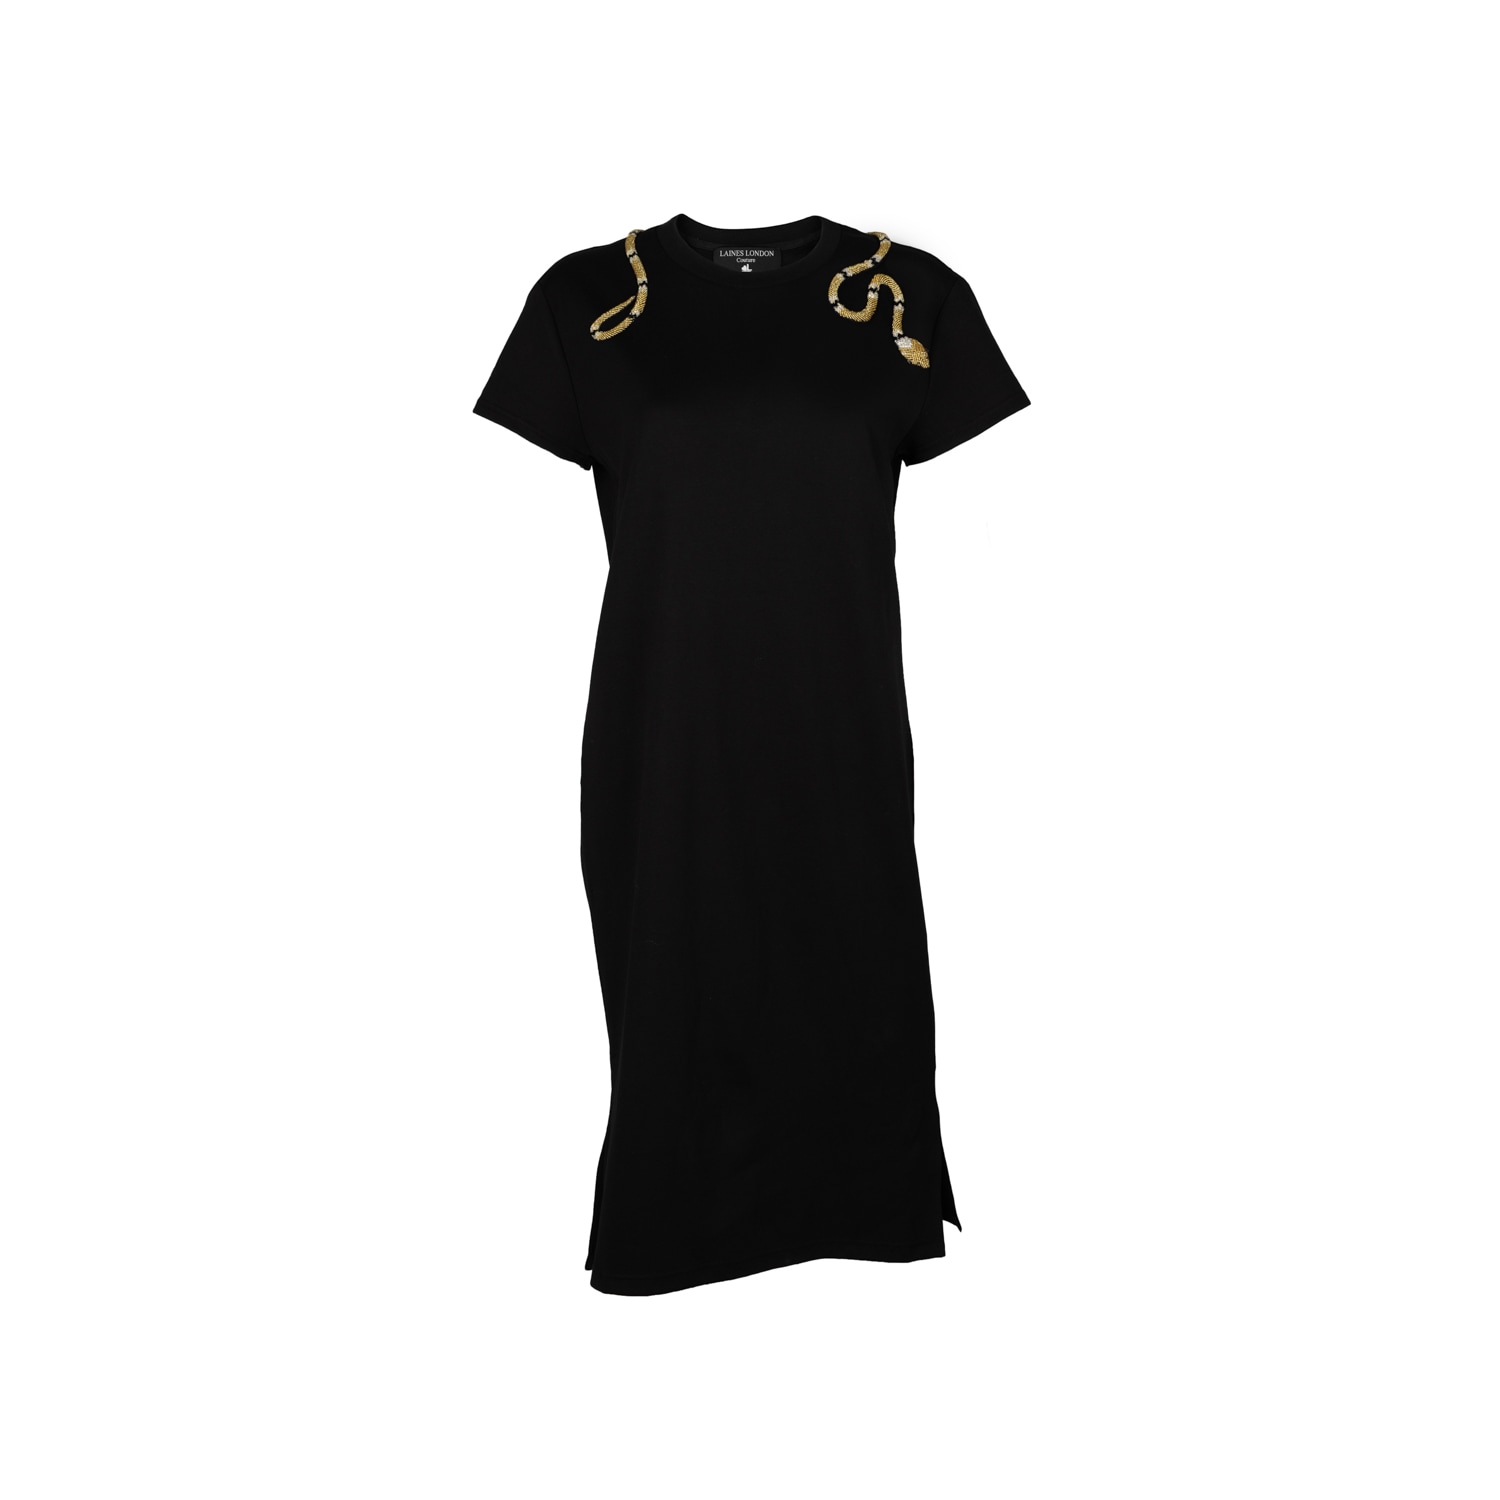 Laines London Women's Laines Couture T-shirt Dress With Embellished Black & Gold Wrap Around Snake